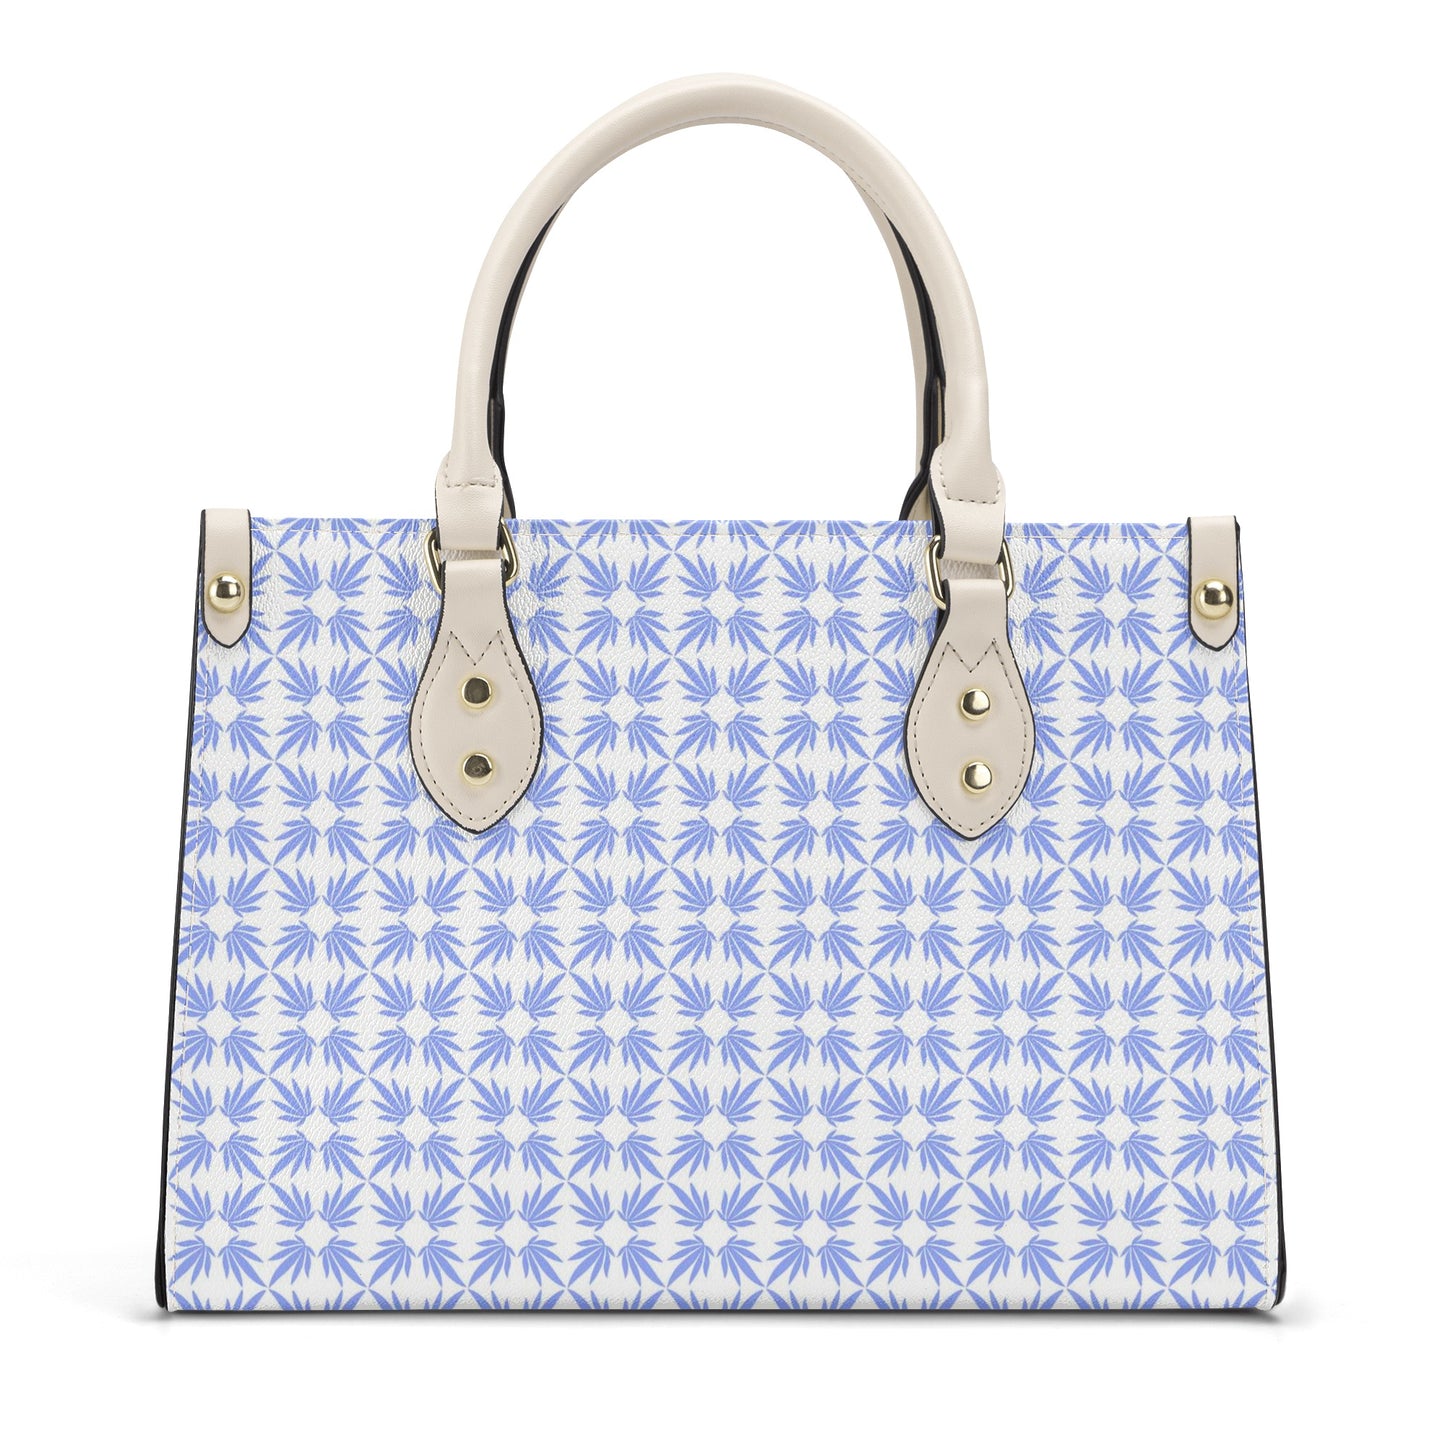 Quatrefoil Print On Vegan Leather Tote in Watteau Blue and Pouf Pink